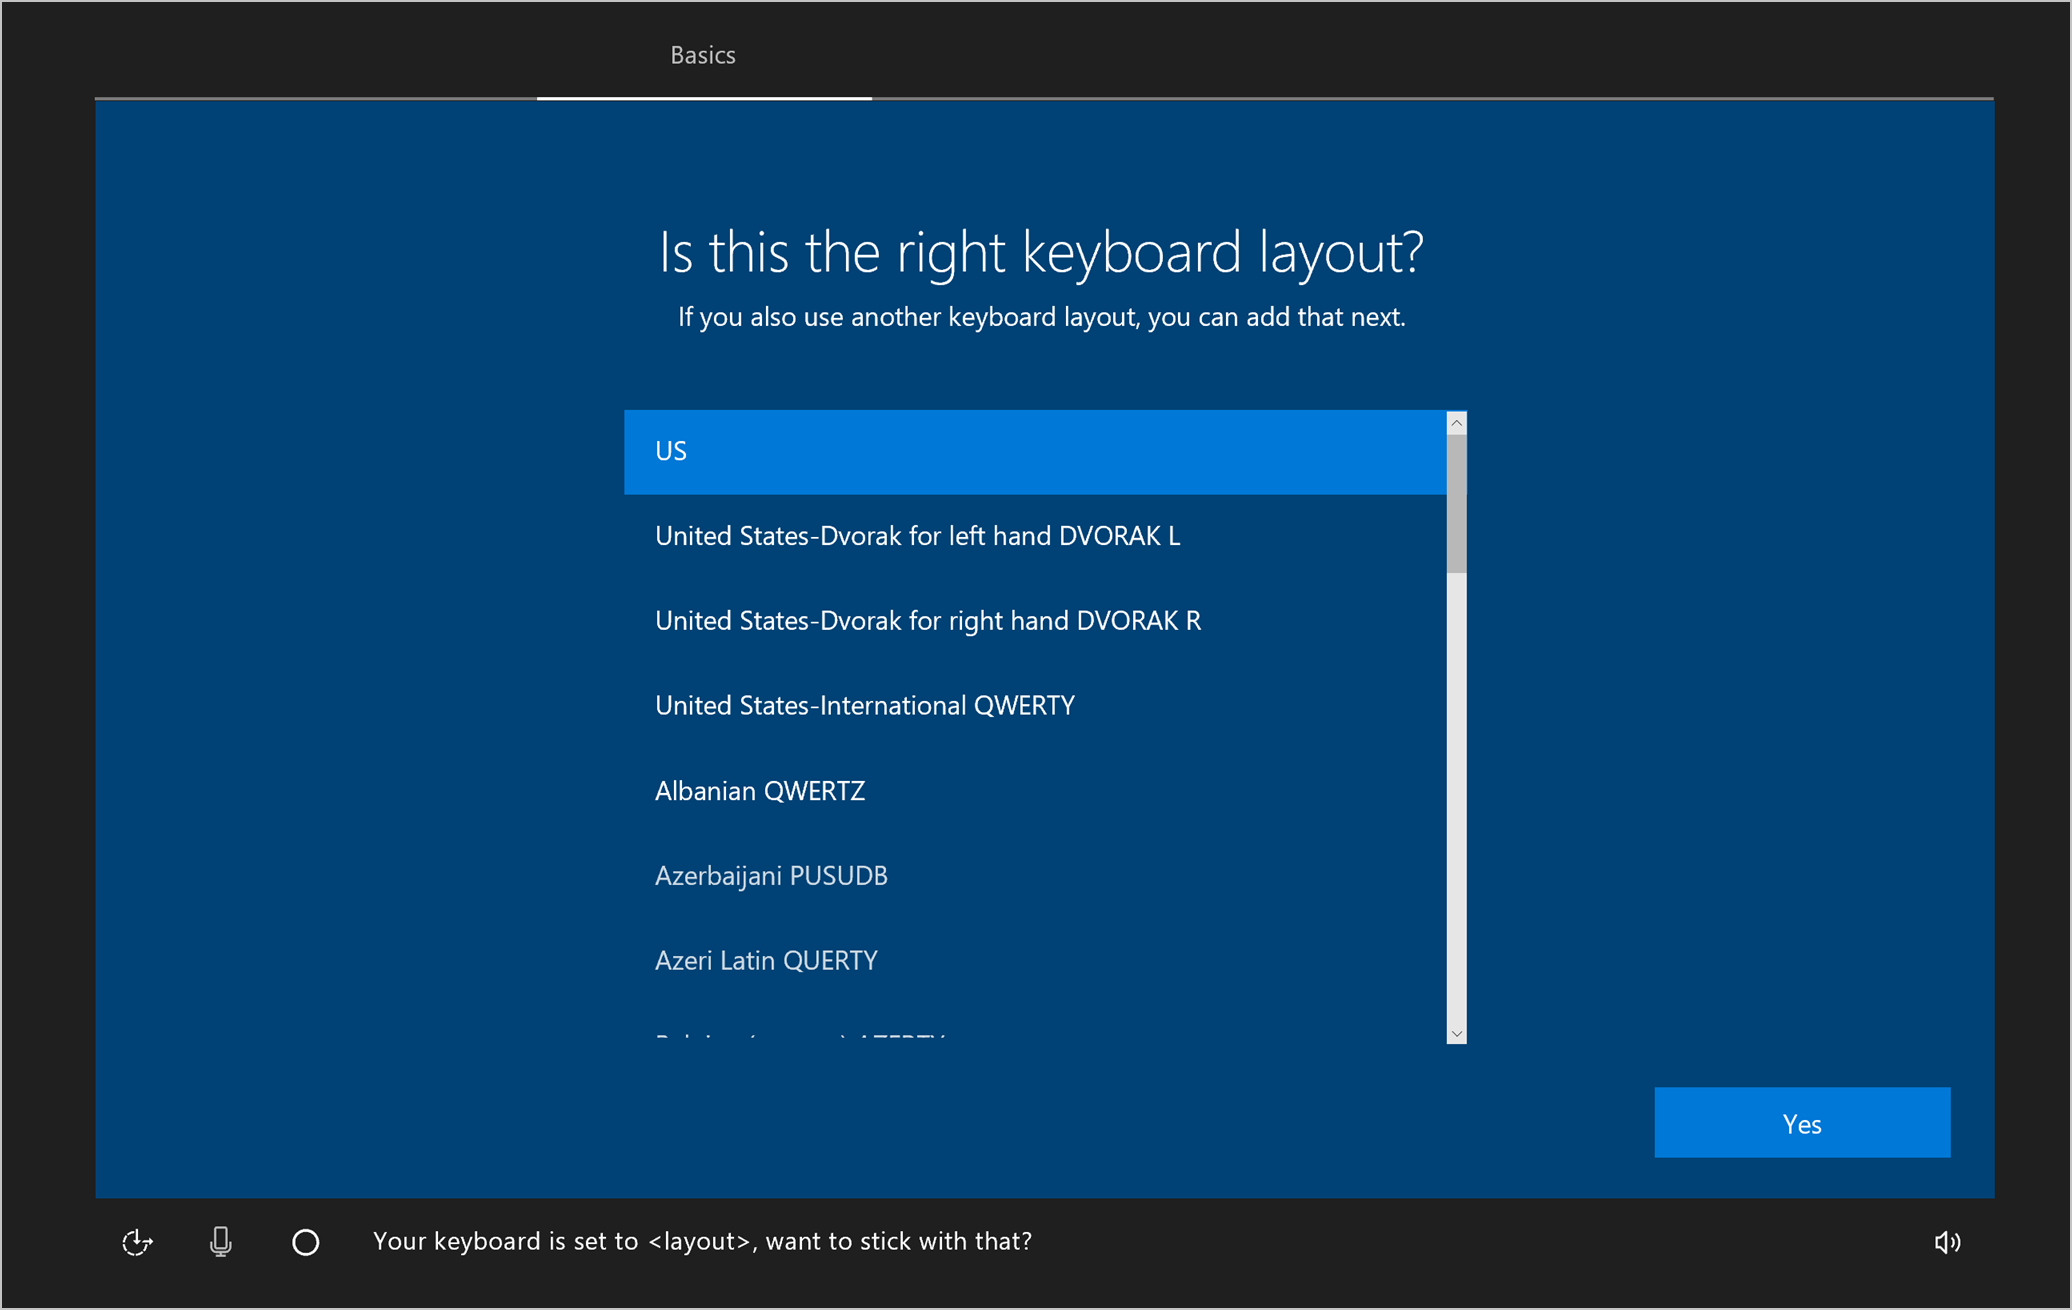 Example screenshot of the keyboard layout screen, with US highlighted as the selected layout.